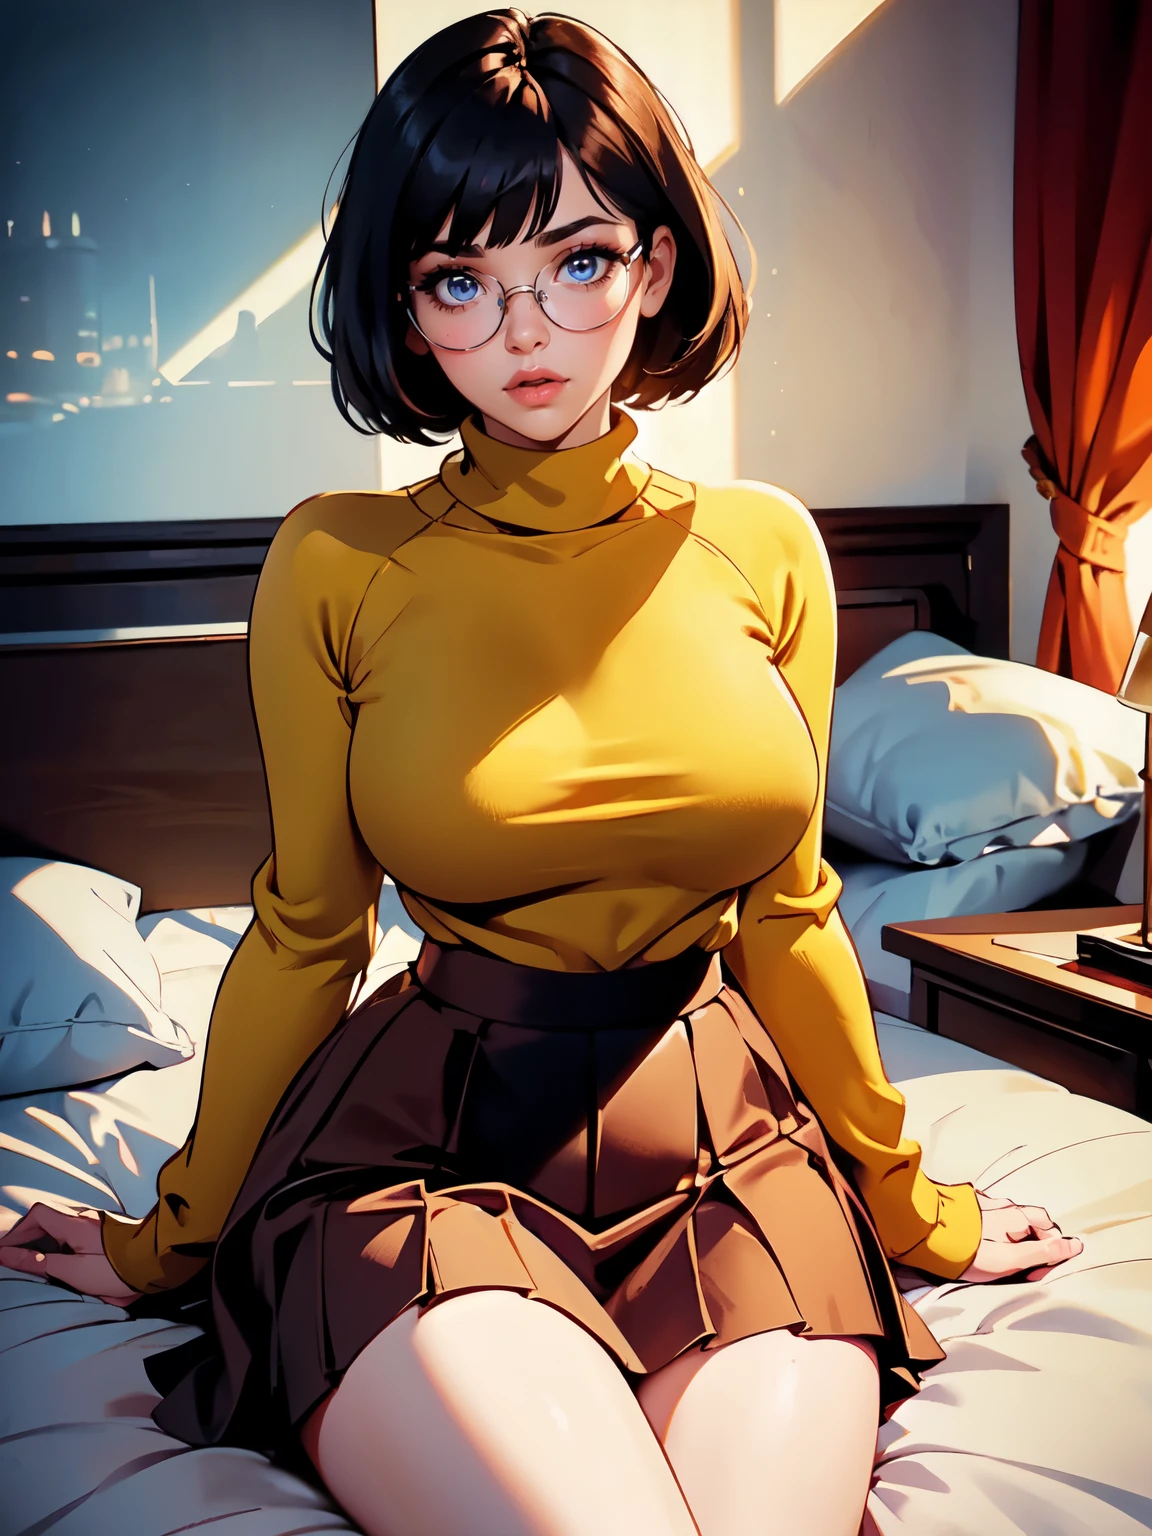 HD, 8k quality, masterpiece, Velma, dream girl, large breasts, beautiful face, kissing lips, short bob hairstyle, long bangs, perfect makeup, realistic face, detailed eyes, blue eyes, brunette hair, eyelashes, slightly open mouth, bedroom, lying on bed, thicc body, showing cameltoe, eyes at viewer, mustard-yellow top, knitted turtle neck sweater, clear lens glasses, red skirt,  skirt,